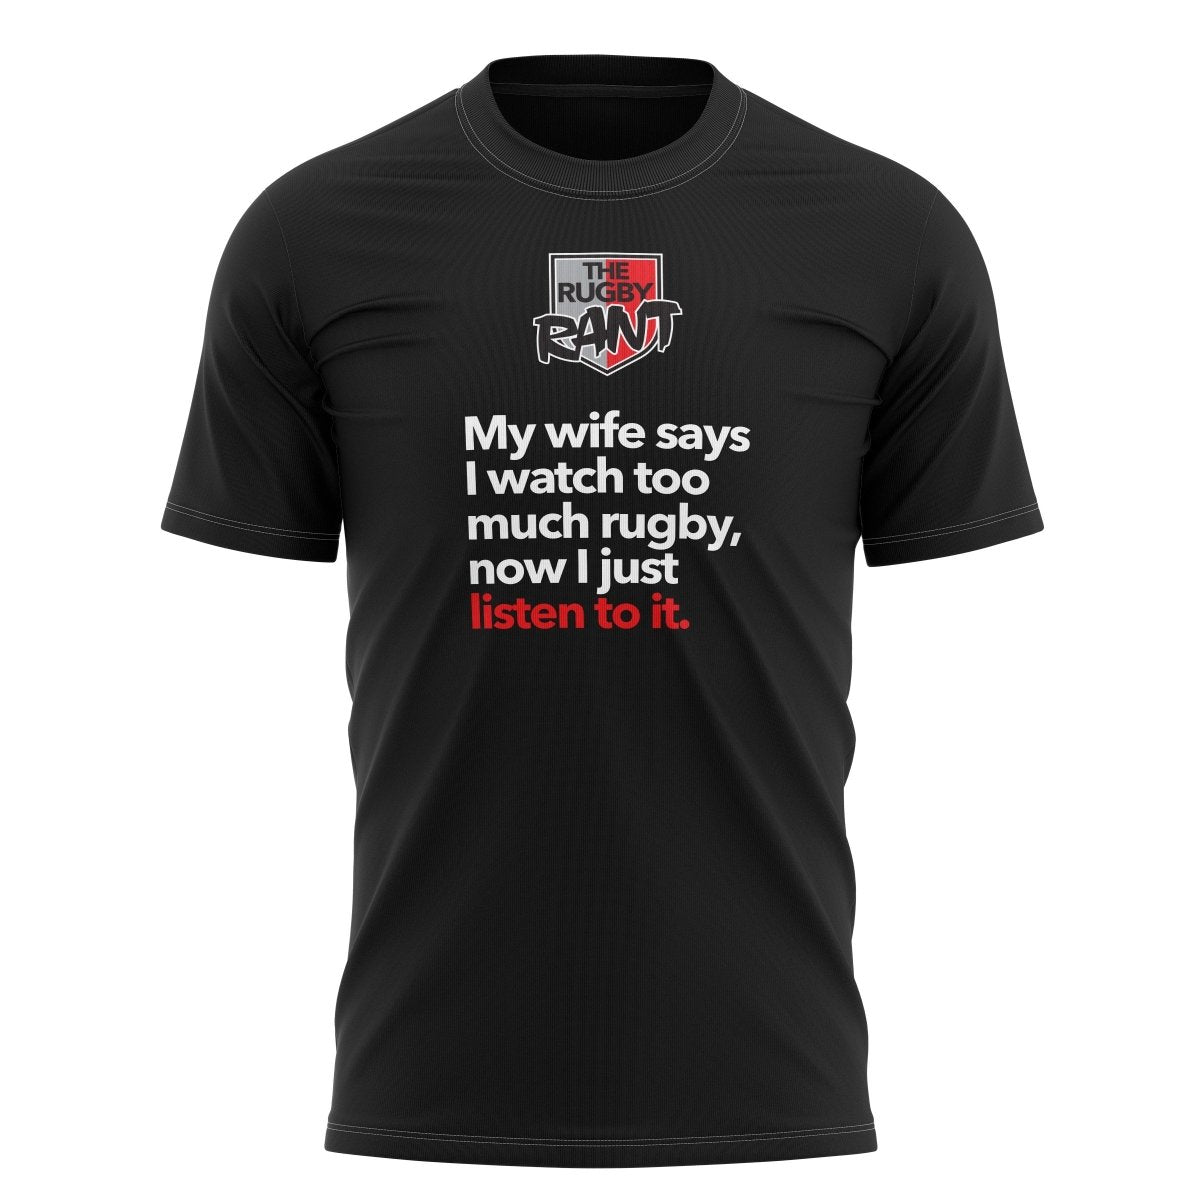 The Rugby Rant &quot;My Wife&quot; Tee - Unisex - www.therugbyshop.com www.therugbyshop.com SANMAR TEES The Rugby Rant &quot;My Wife&quot; Tee - Unisex